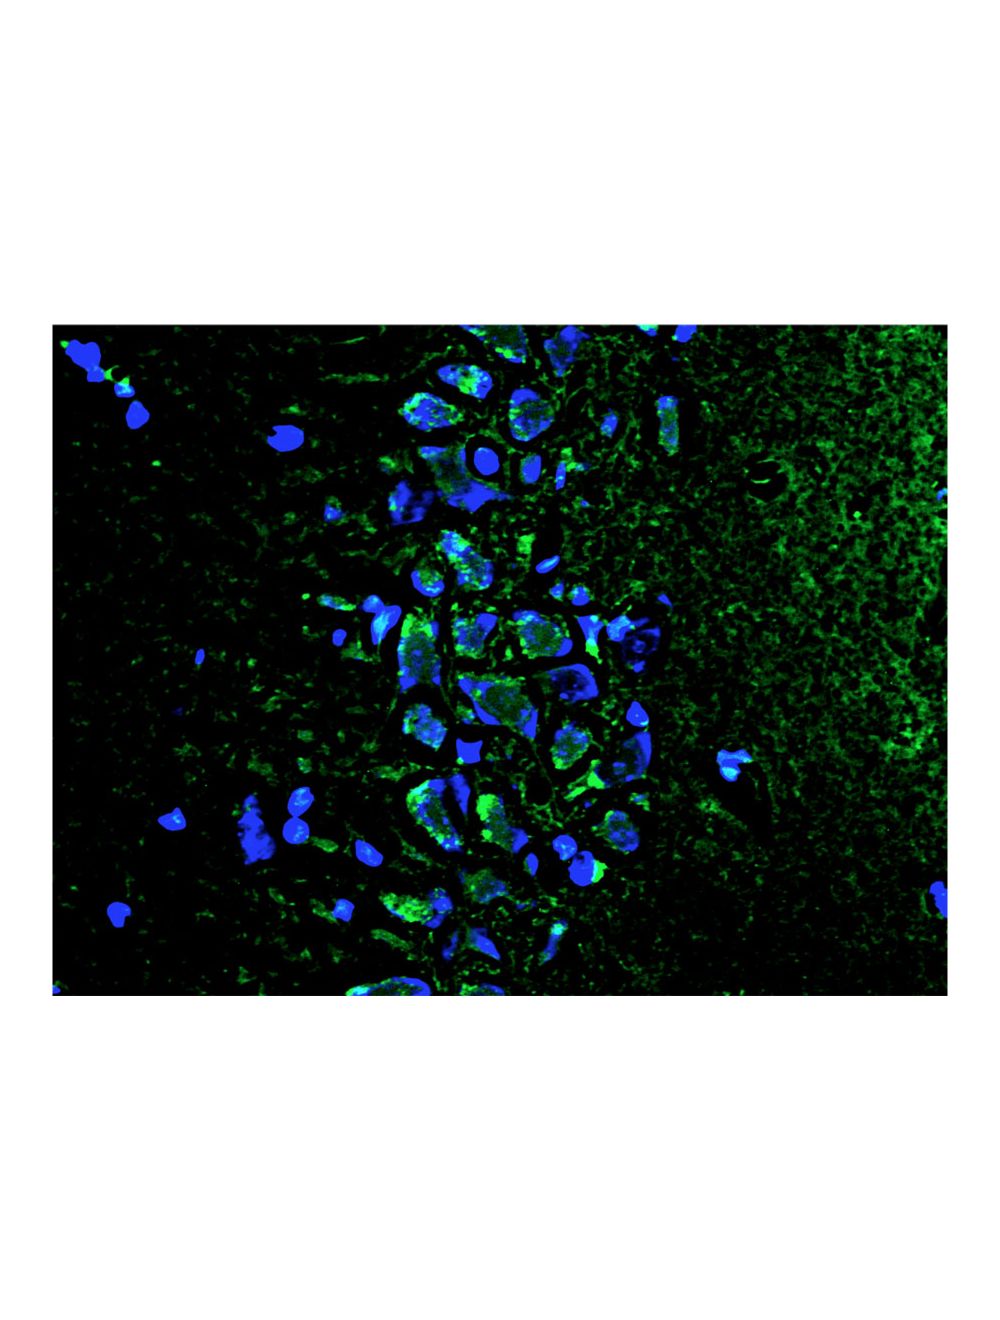 Fluoro-Jade C (FJC) Ready-to-Dilute Staining Kit for identifying  Degenerating Neurons